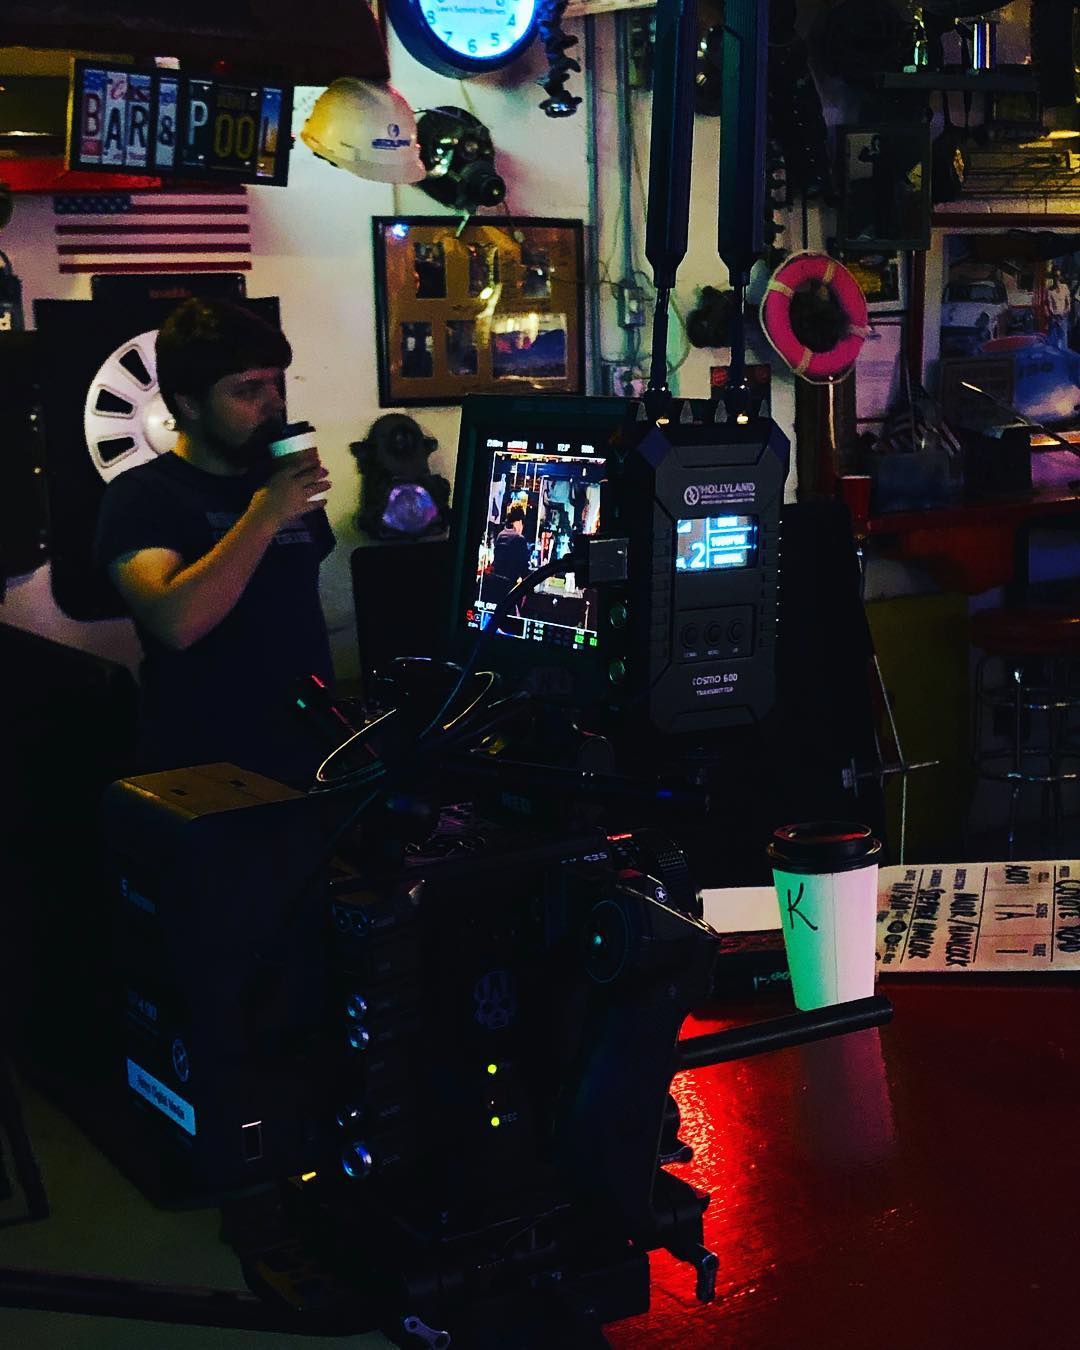 Using the new Cosmo600 wireless system on a RED Gemini. Very happy with this vid system so far! Strong signal, super low latency and connects almost immediately. Perfect for 1st AC monitors & director monitors. .
.
.
.
#RED #LAFilm #NYFilm #bts #wireless #Cosmo #Hollyland #filmmaking #film #cinema #lighting #production #agency #studio #freelance #forhire #instagood #smallhd #redrock